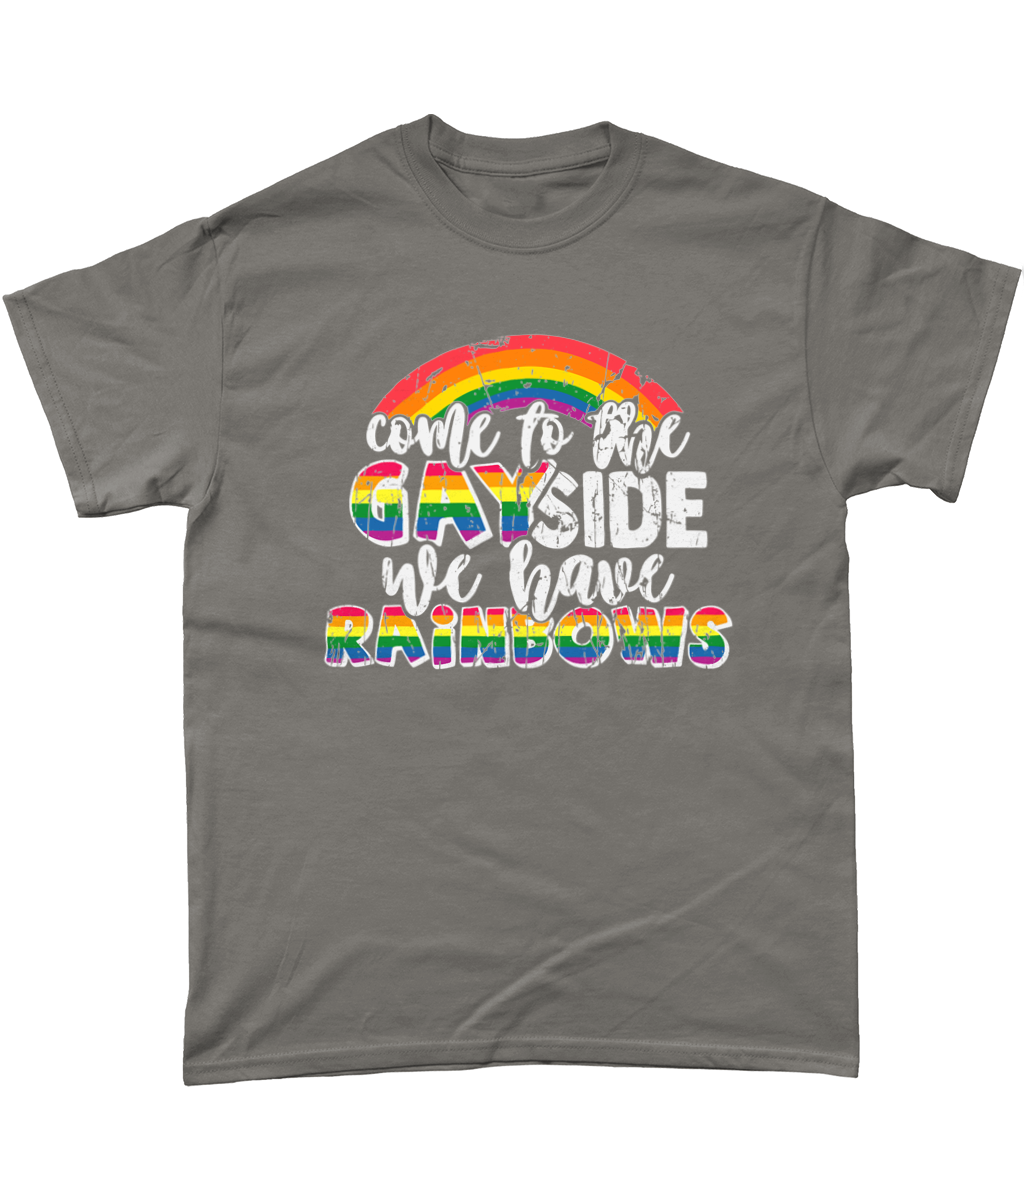 Come to the gayside we have rainbows t-shirt